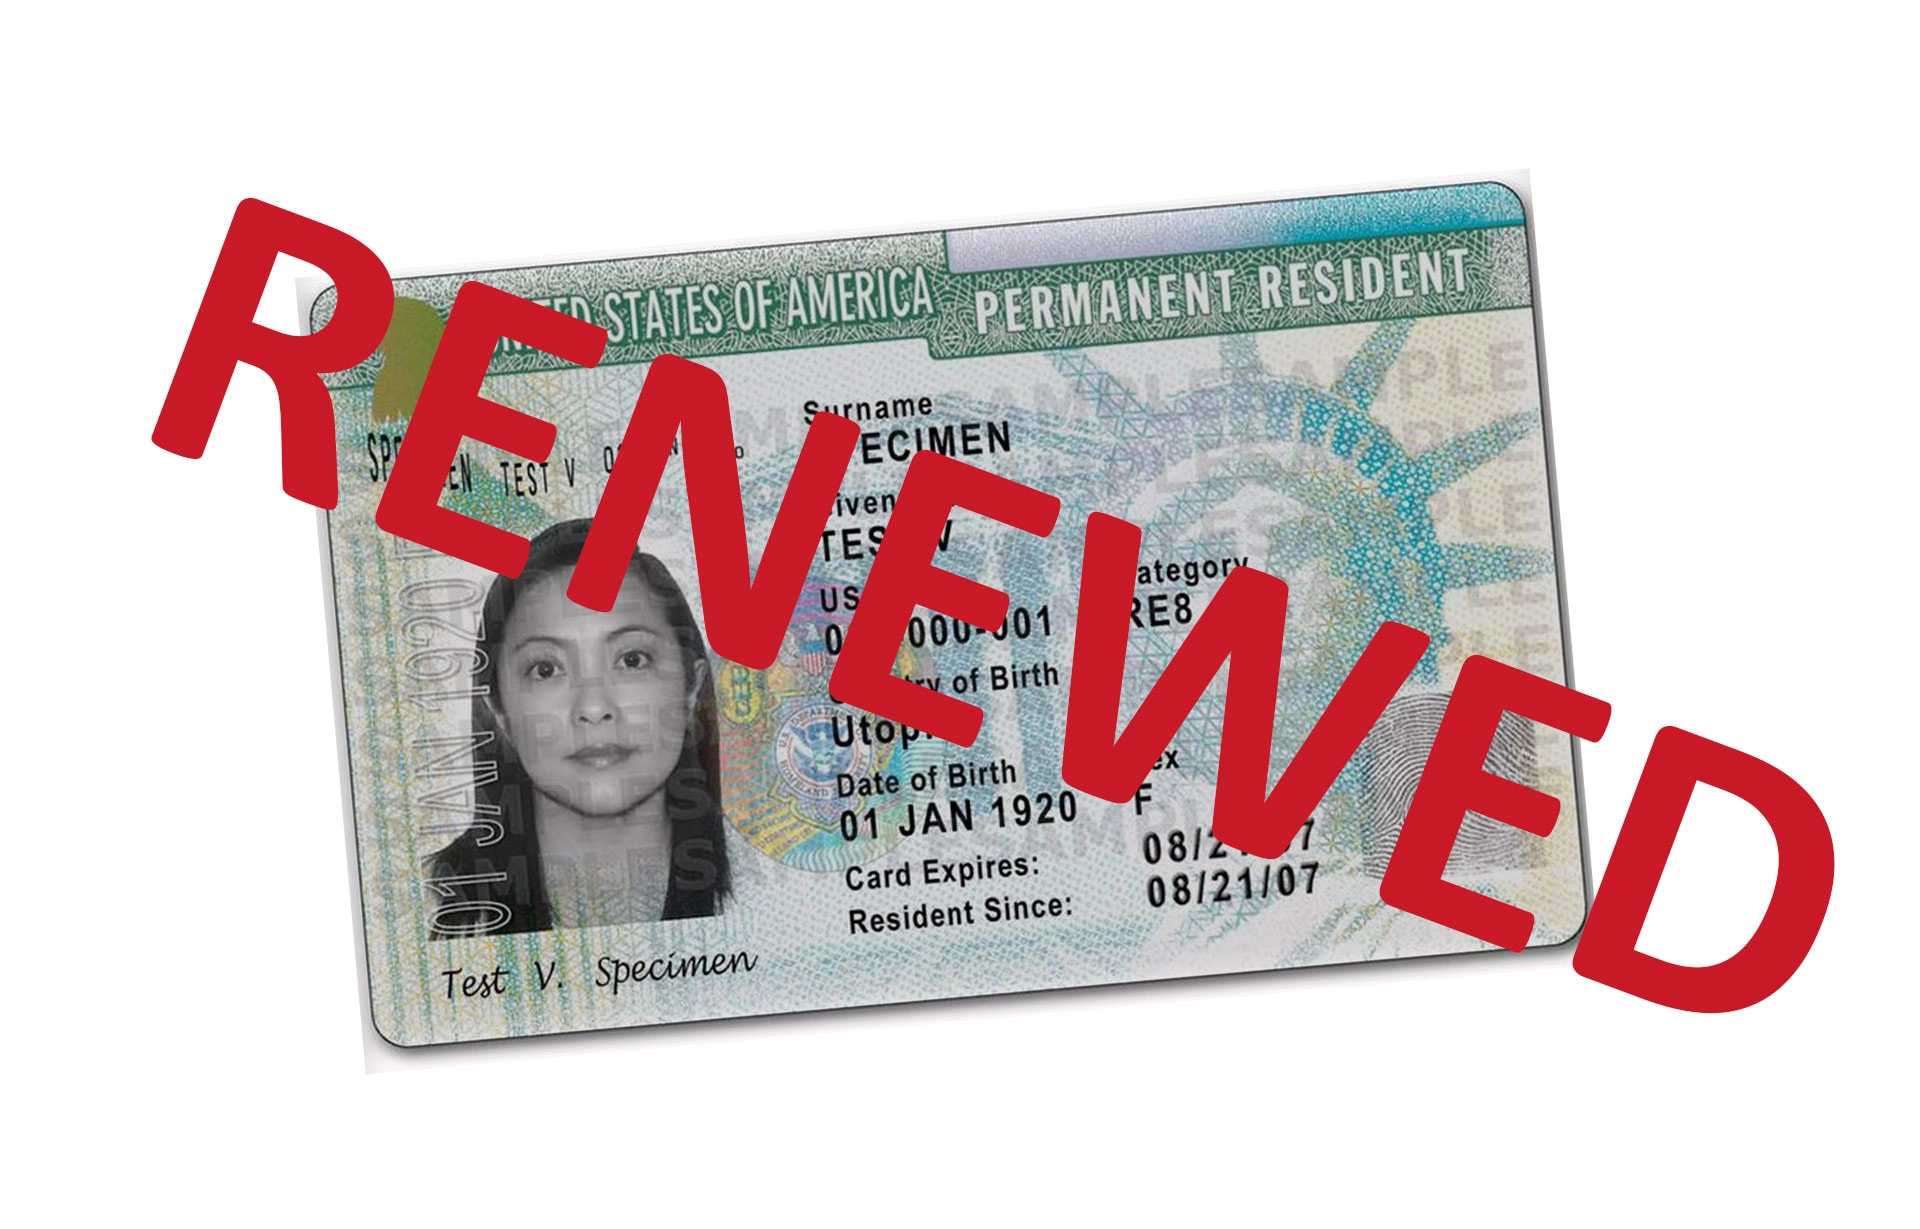 Renew Green Card How Long Does the Process Take? Current School News